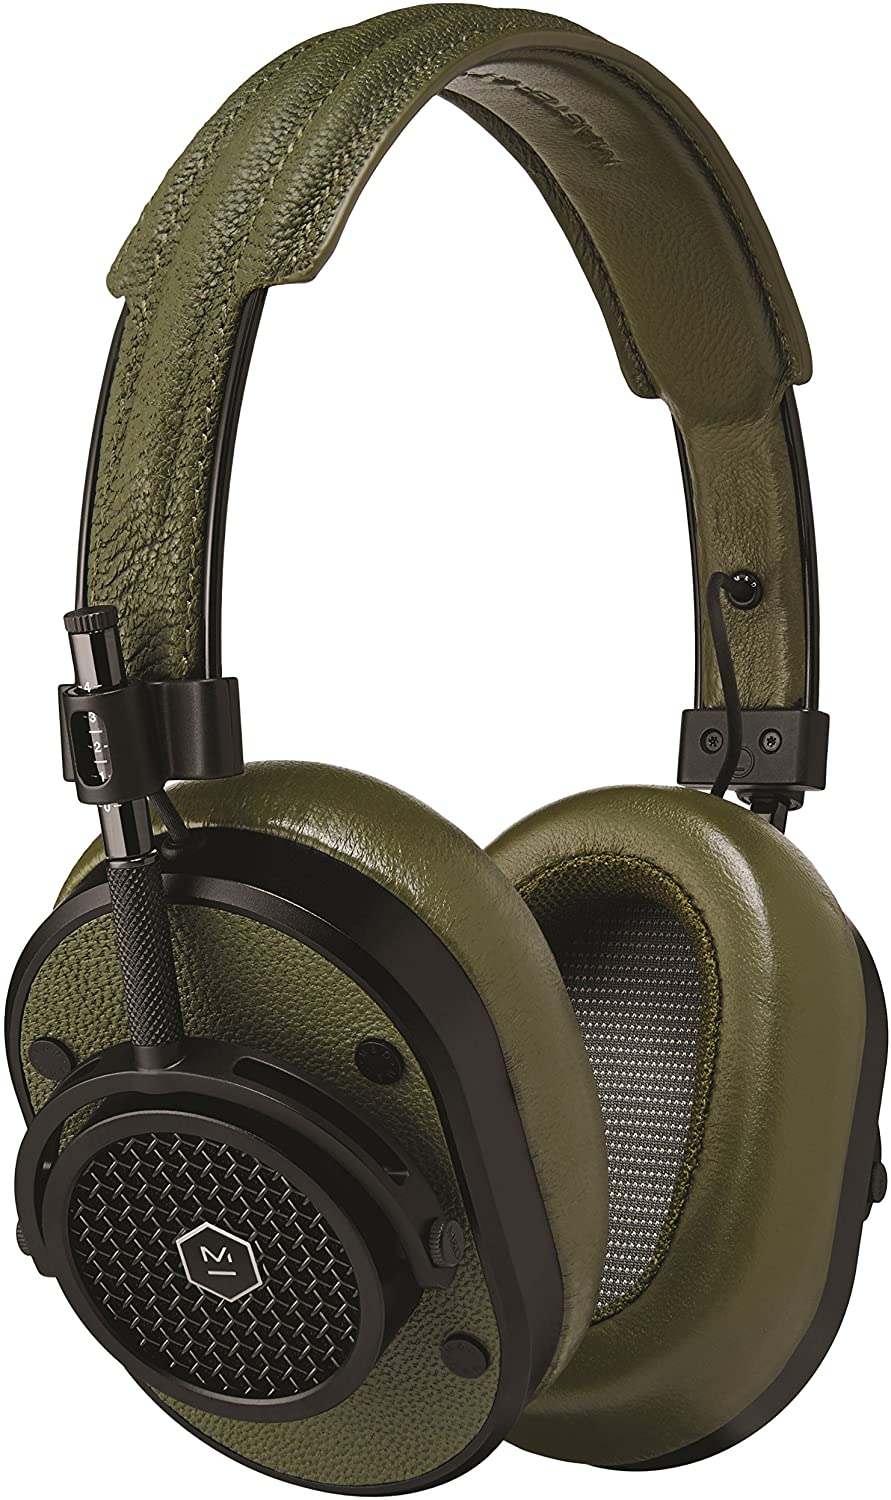 ''MASTER & DYNAMIC MH40 Over-Ear HEADPHONES with Wire - Noise Isolating with Mic Recording Studio Hea